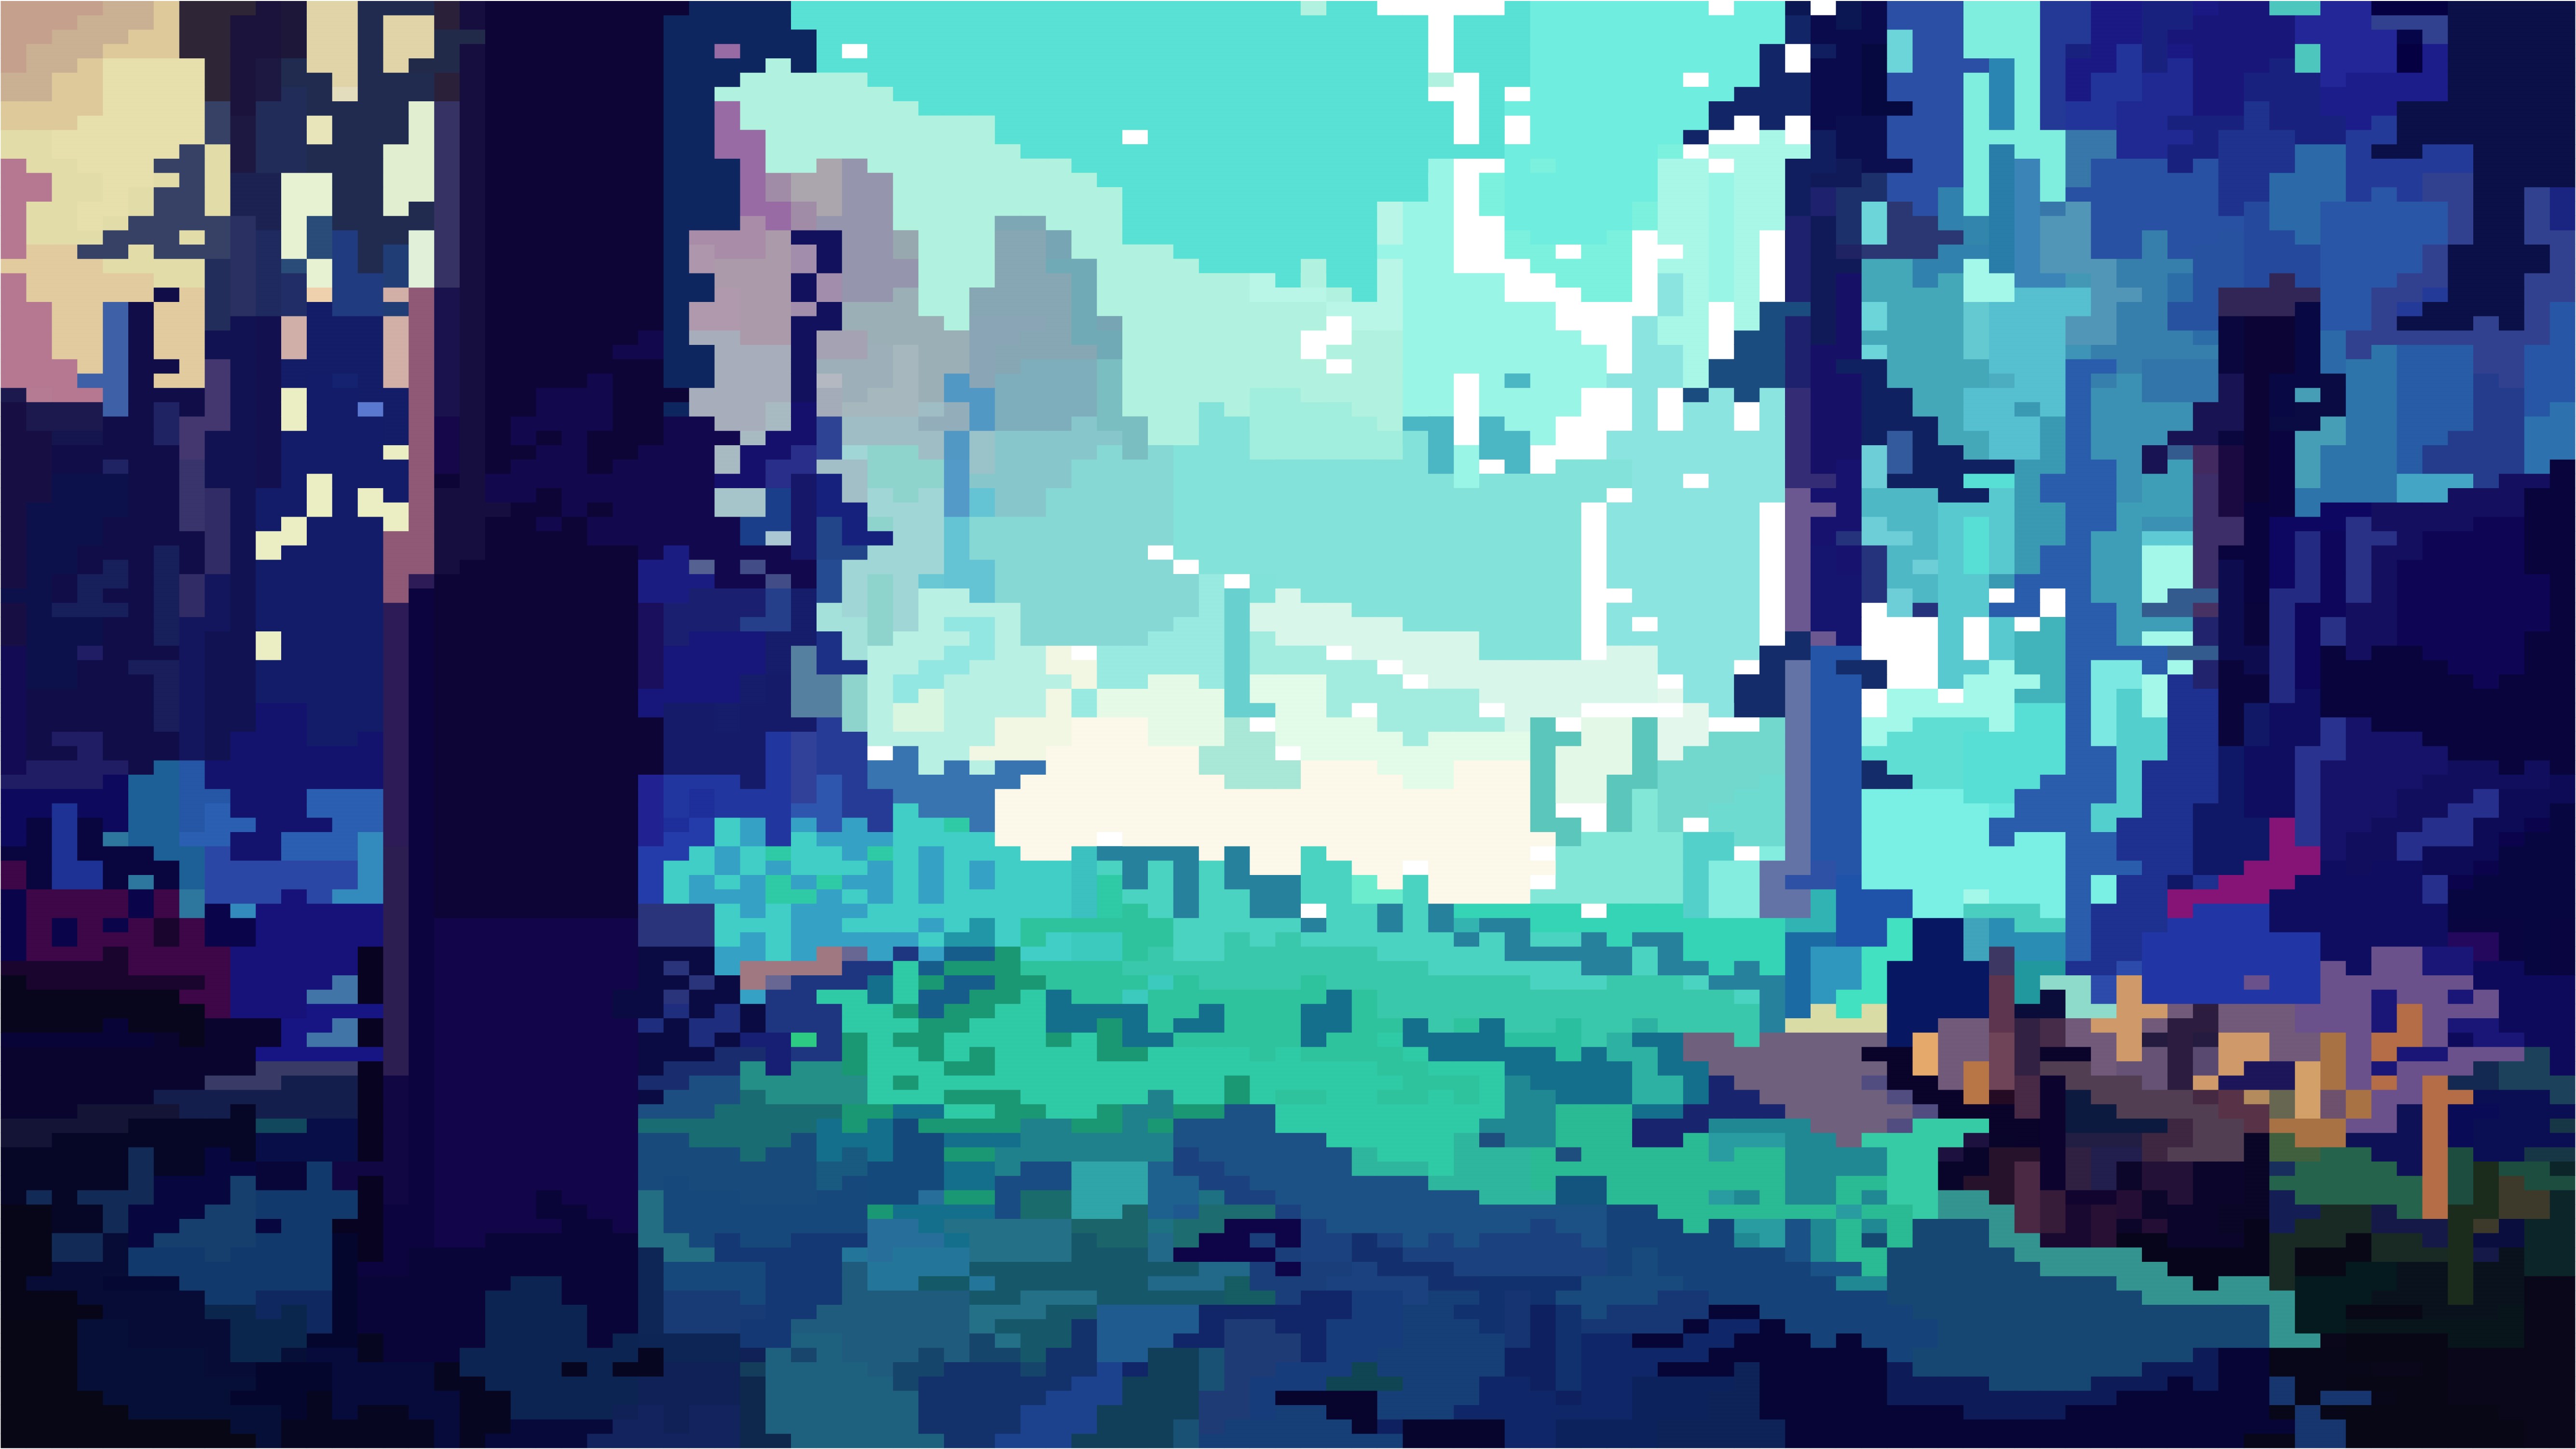 A pixel art of the forest - Cyan